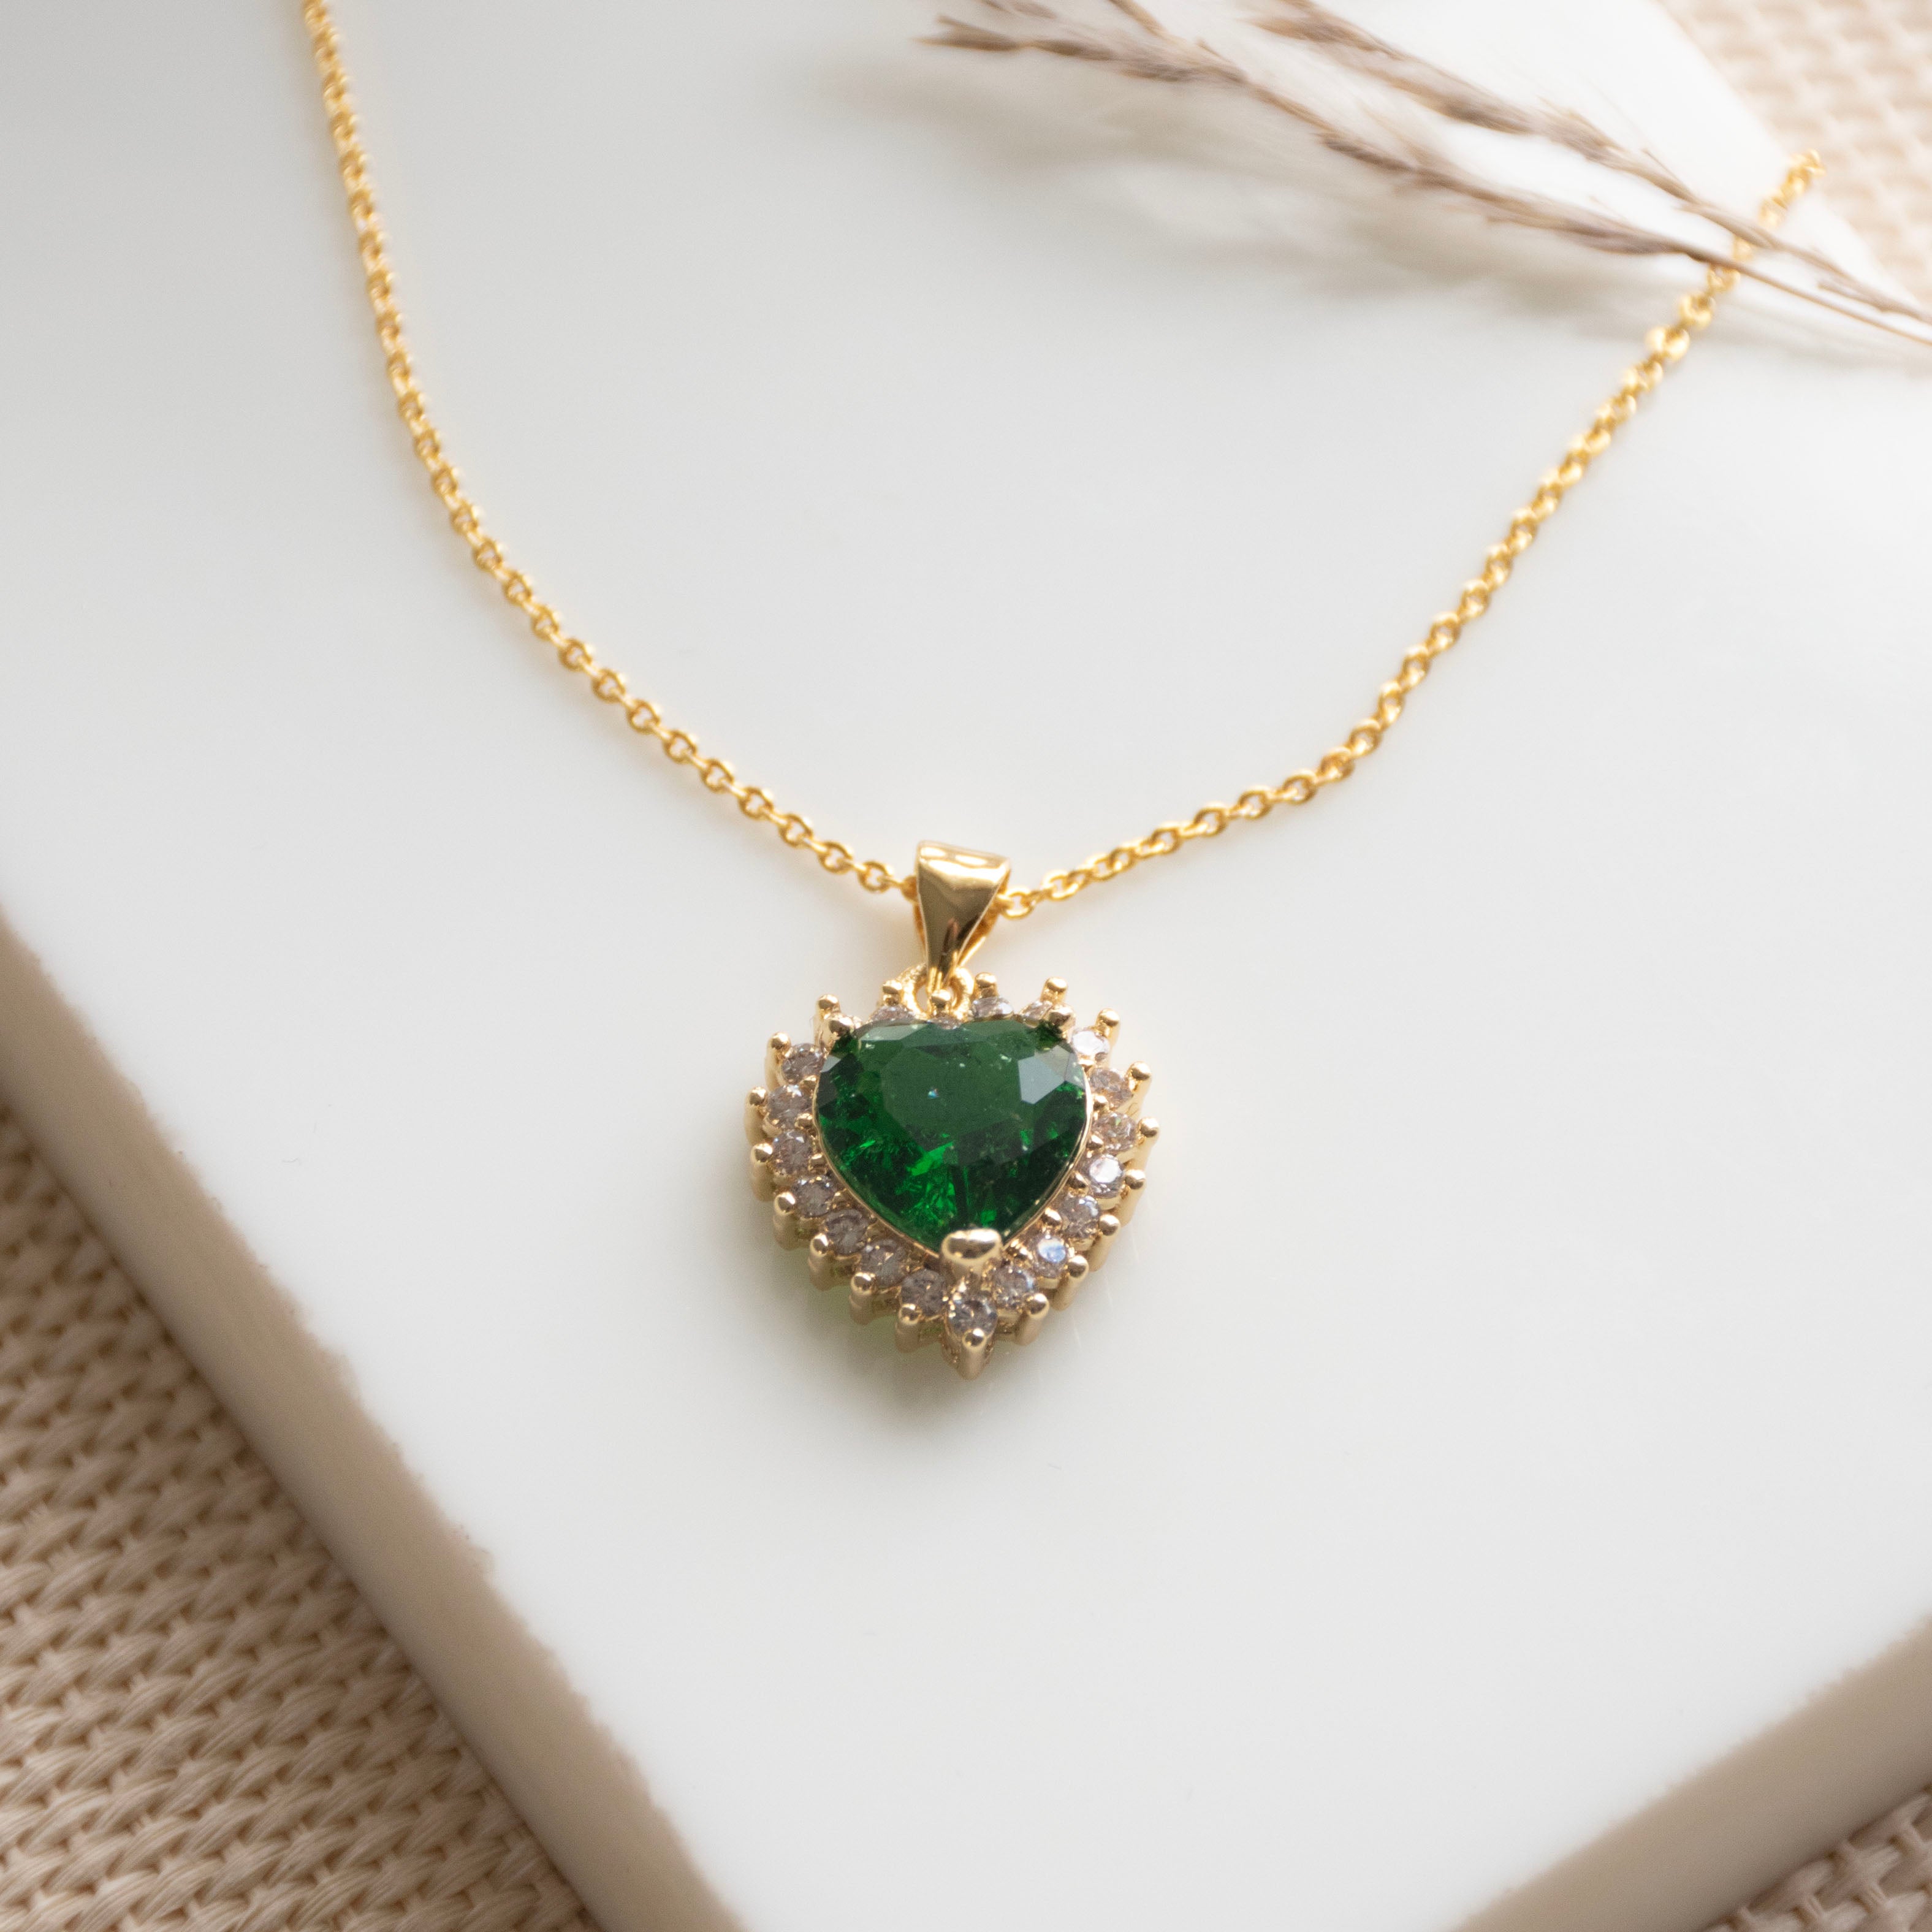 The Enigmatic Emerald Mix Necklace